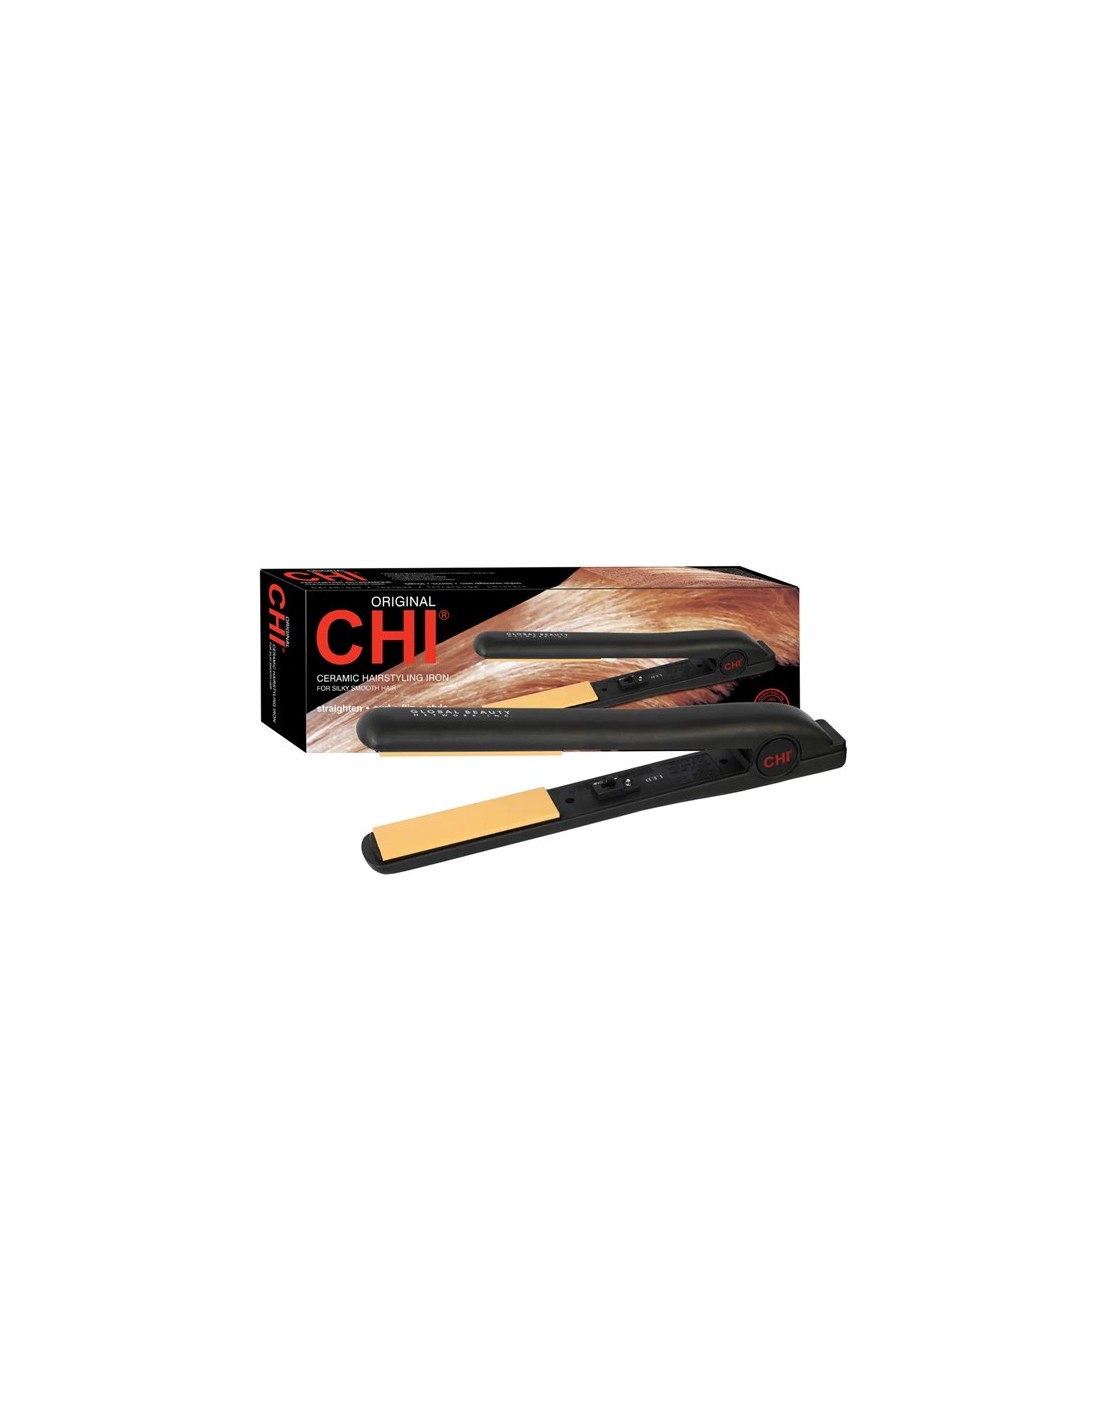 CHI AIR EXPERT Classic Tourmaline Ceramic Hairstyling Iron 1” - Limited  Edition Petal Party | LovelySkin